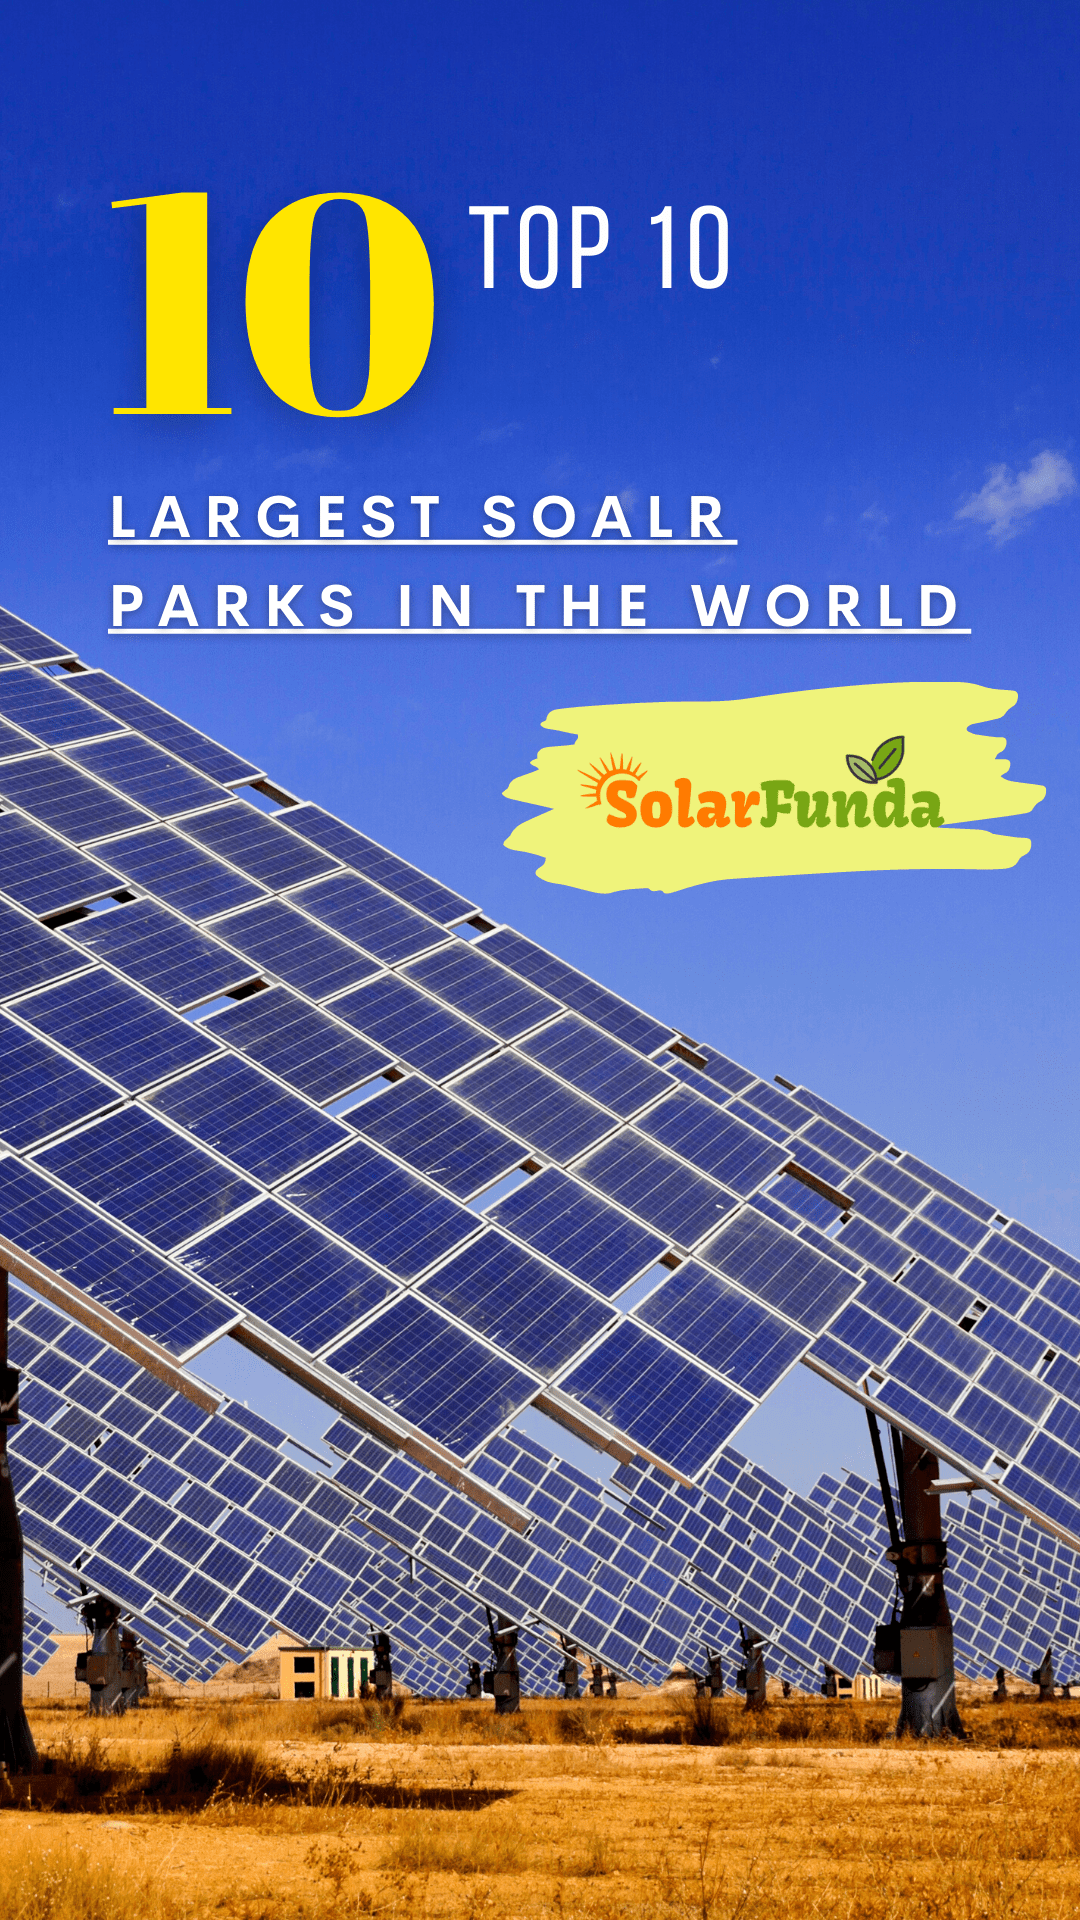 Top 10 largest Solar Parks in the World